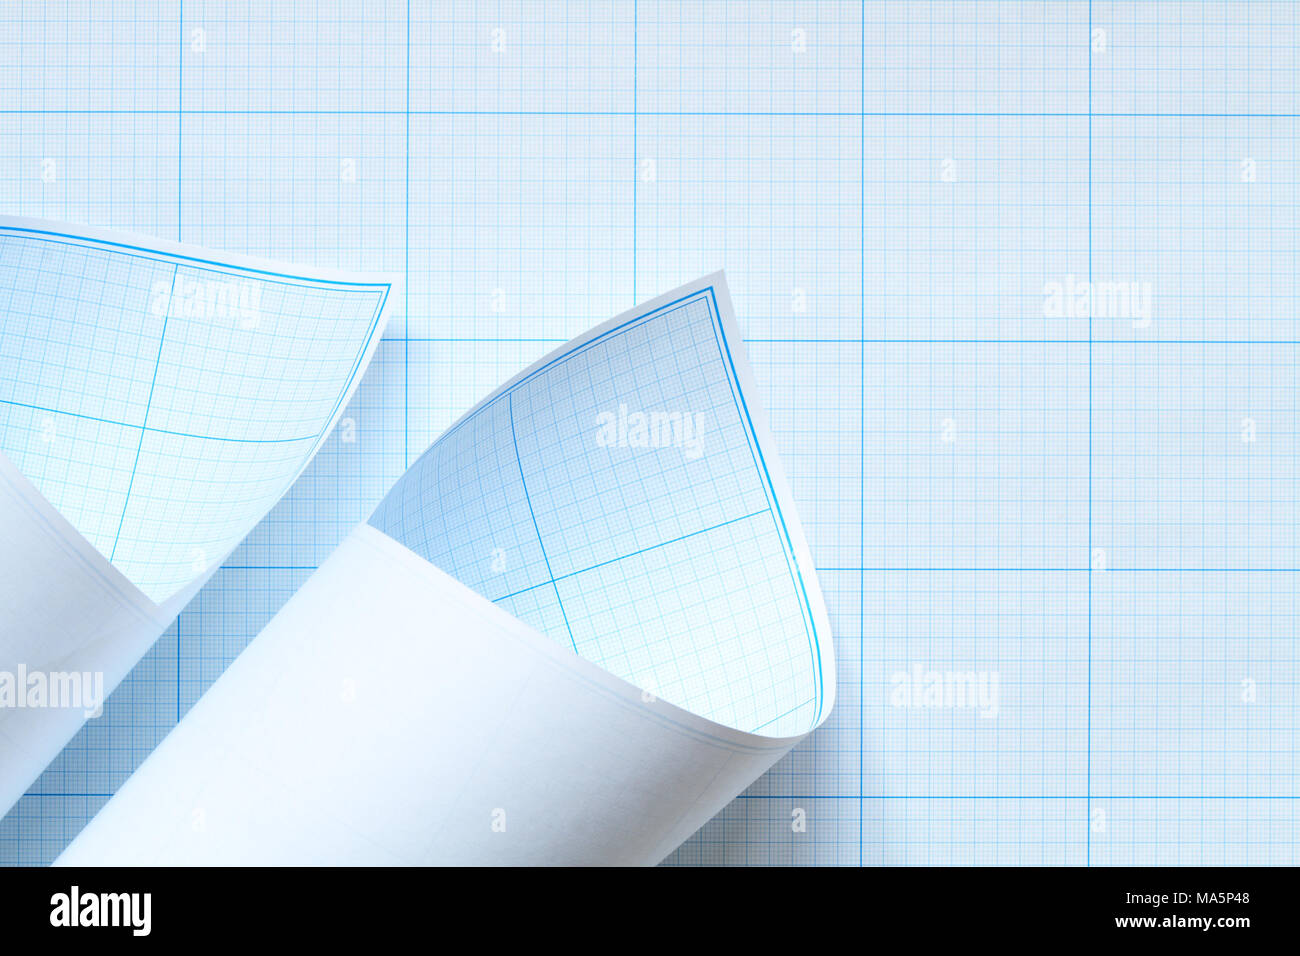 Background made from blue graph paper sheets Stock Photo